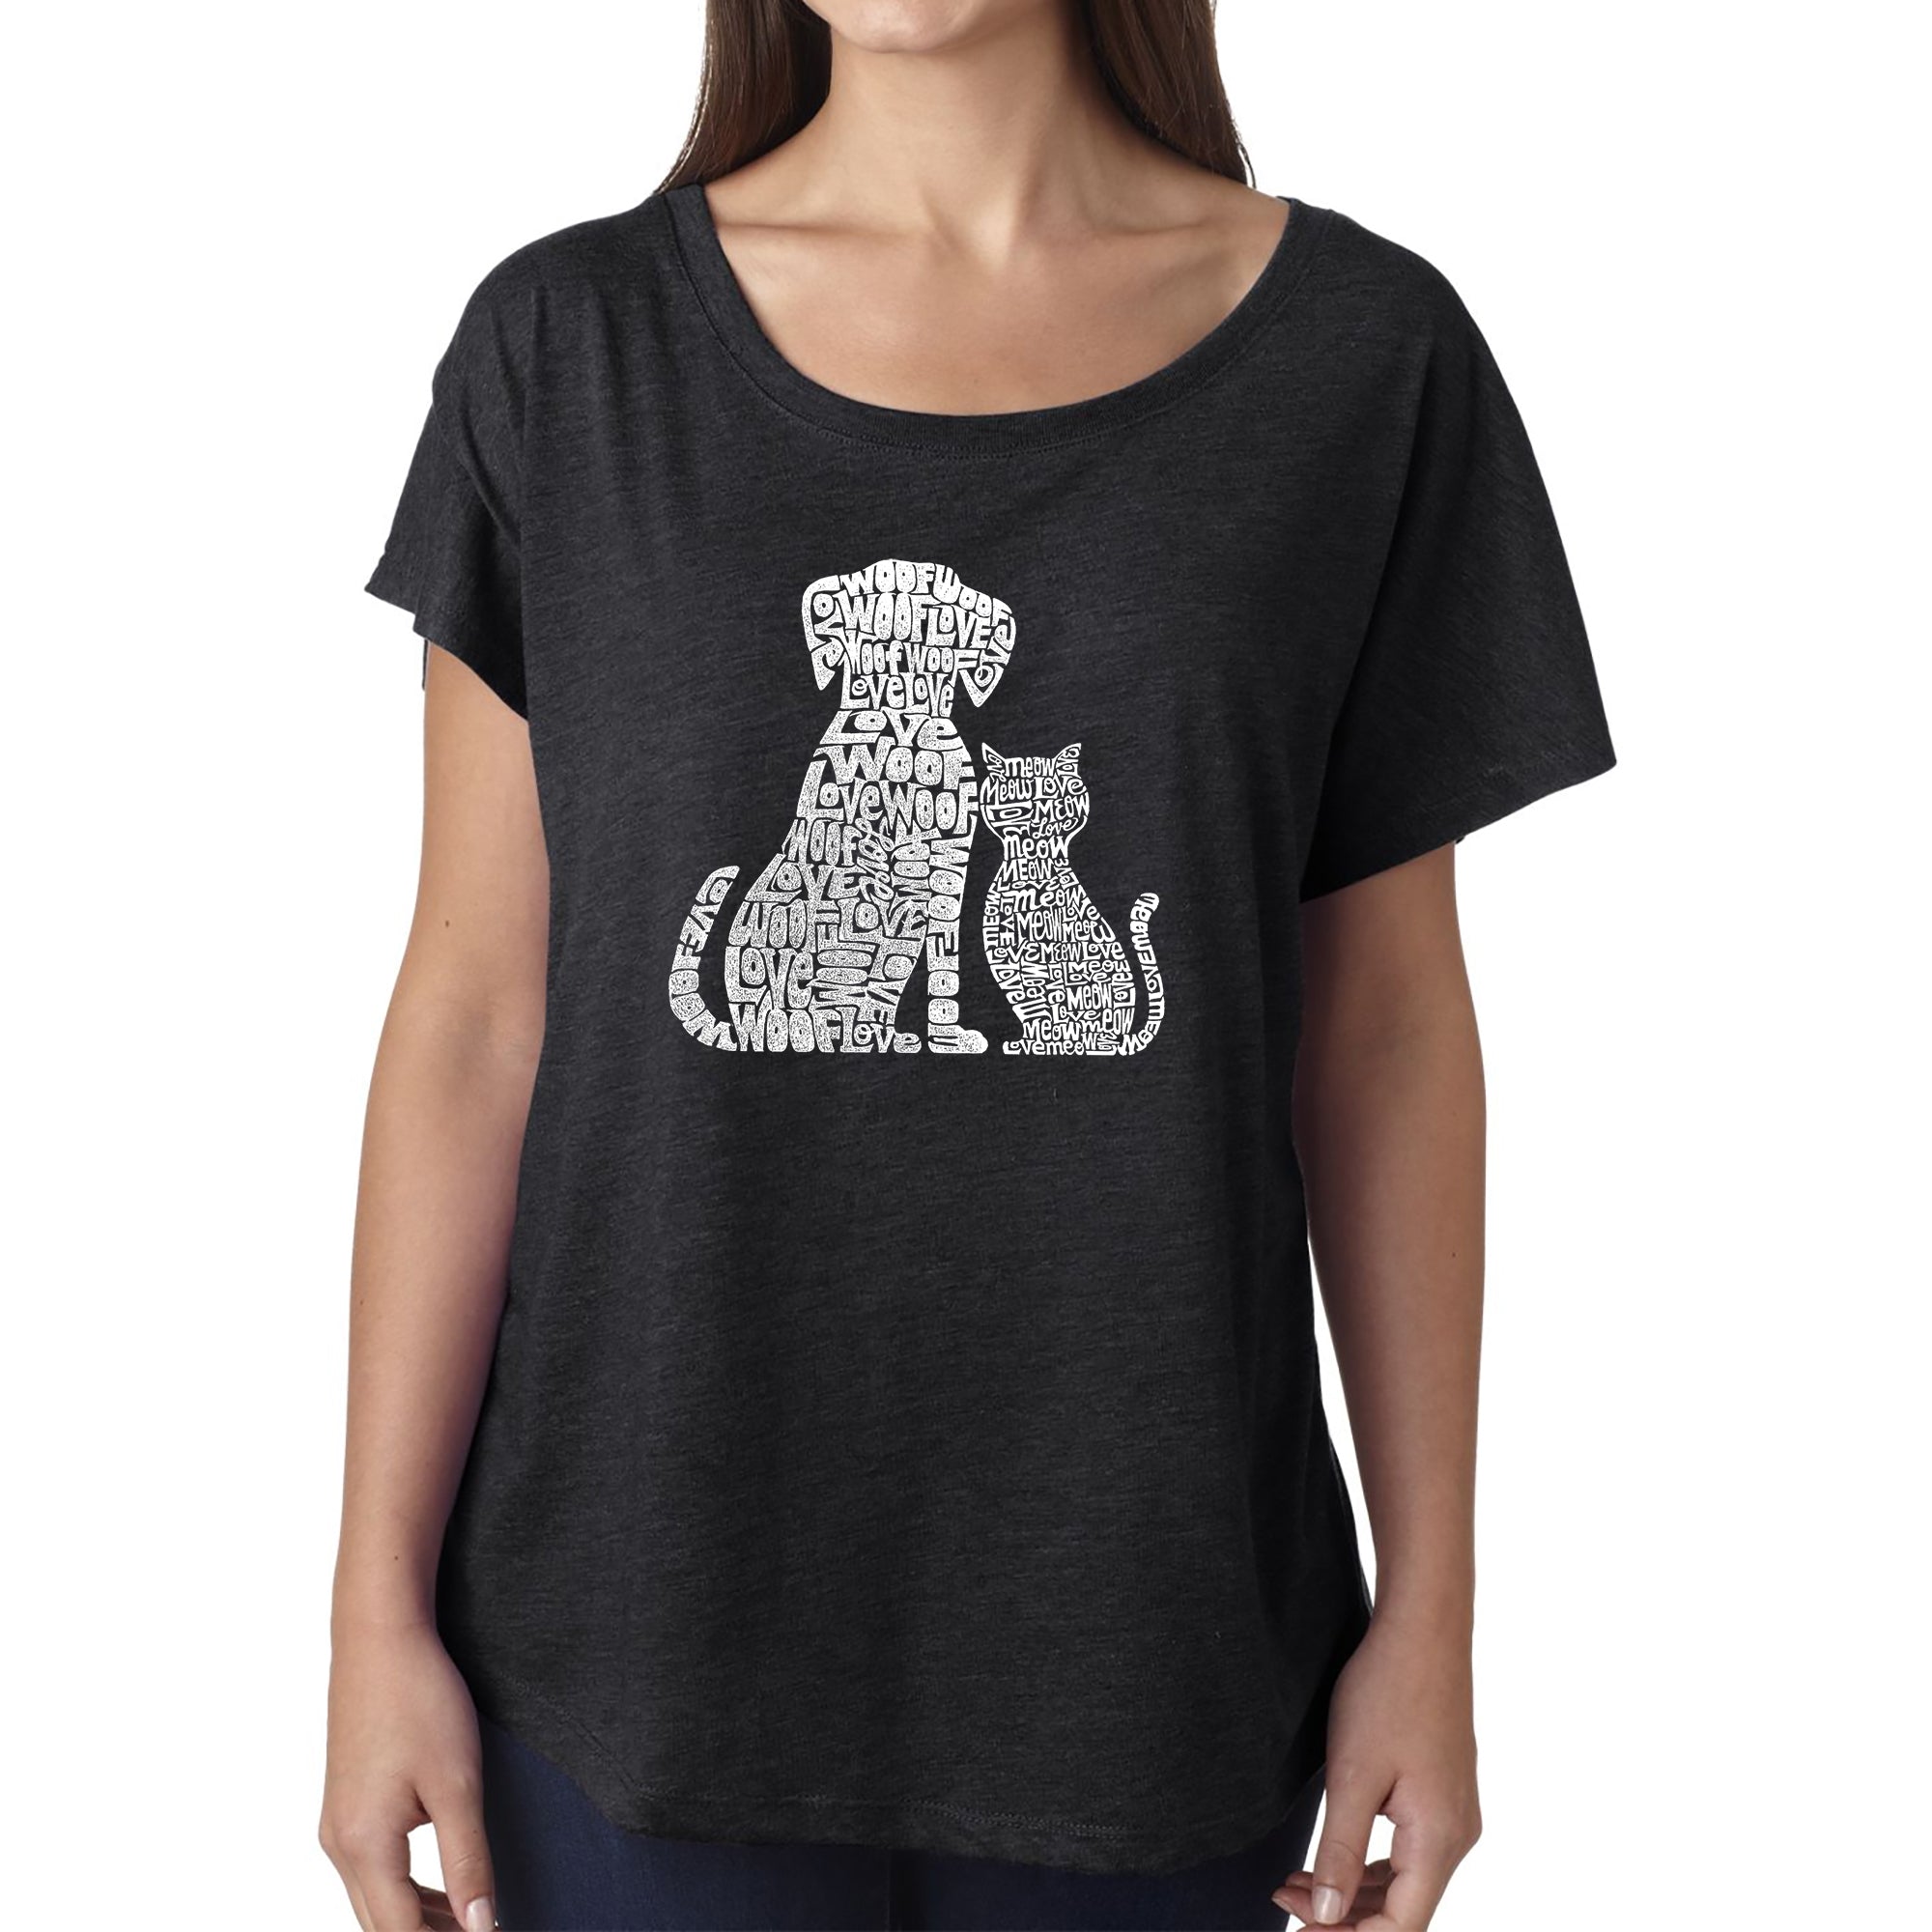 Dogs And Cats - Women's Loose Fit Dolman Cut Word Art Shirt - Black - XX-Large